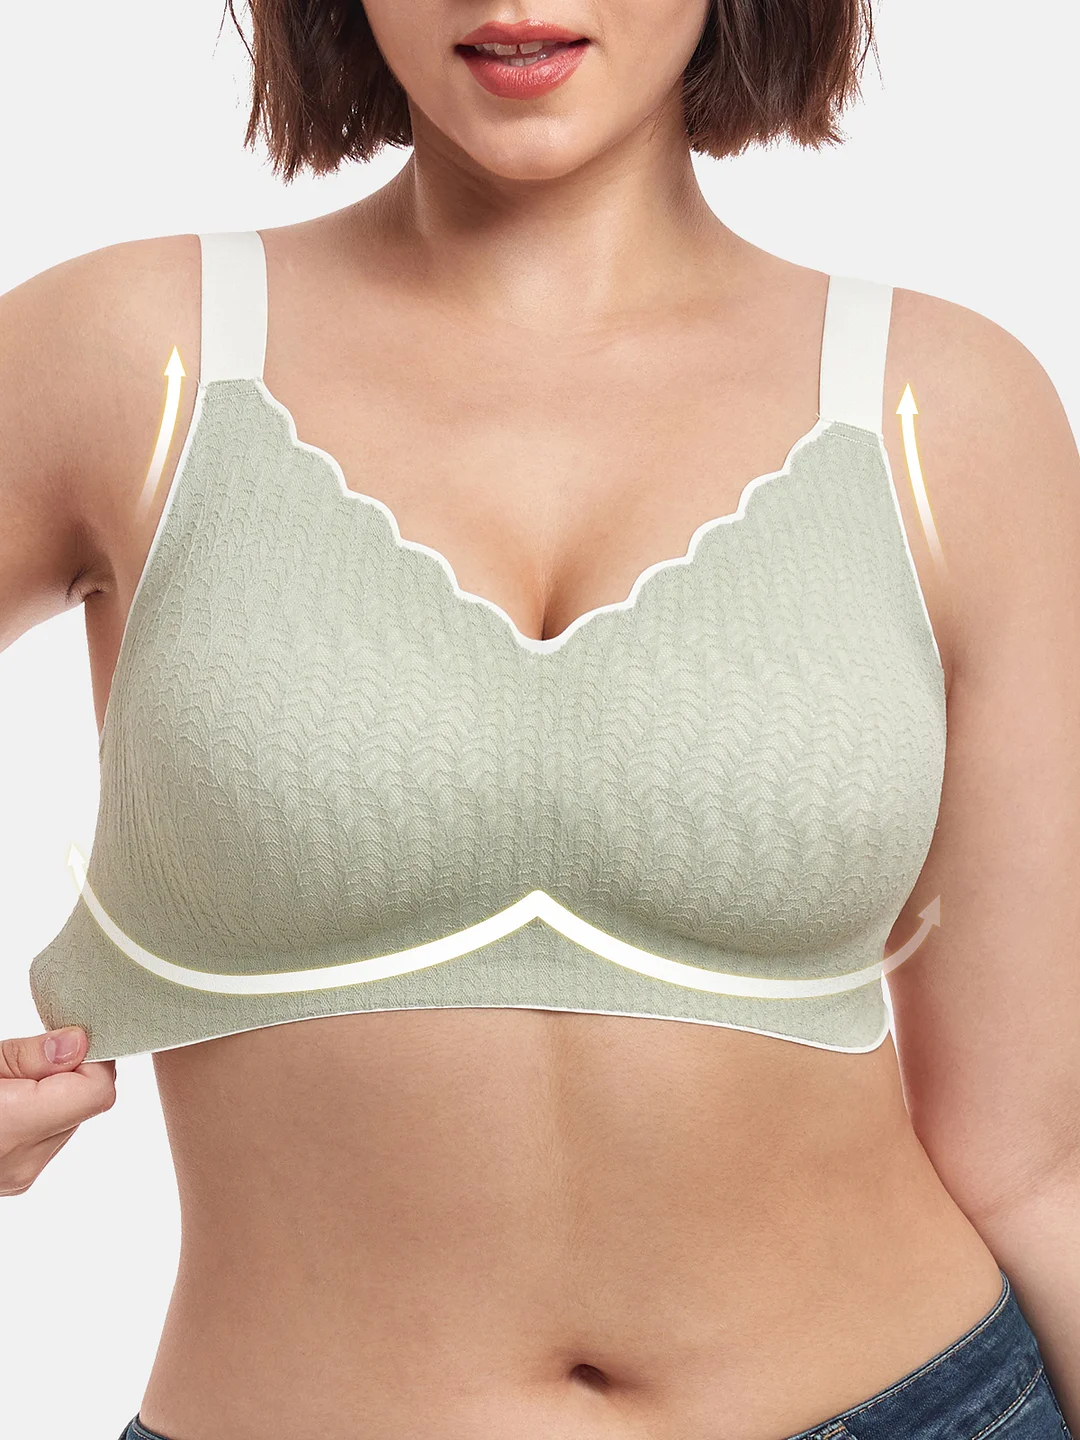 Brabalas Unlined Smooth Wireless Bras for Women with Support and Lift  Comfort Seamless Bra V Neck